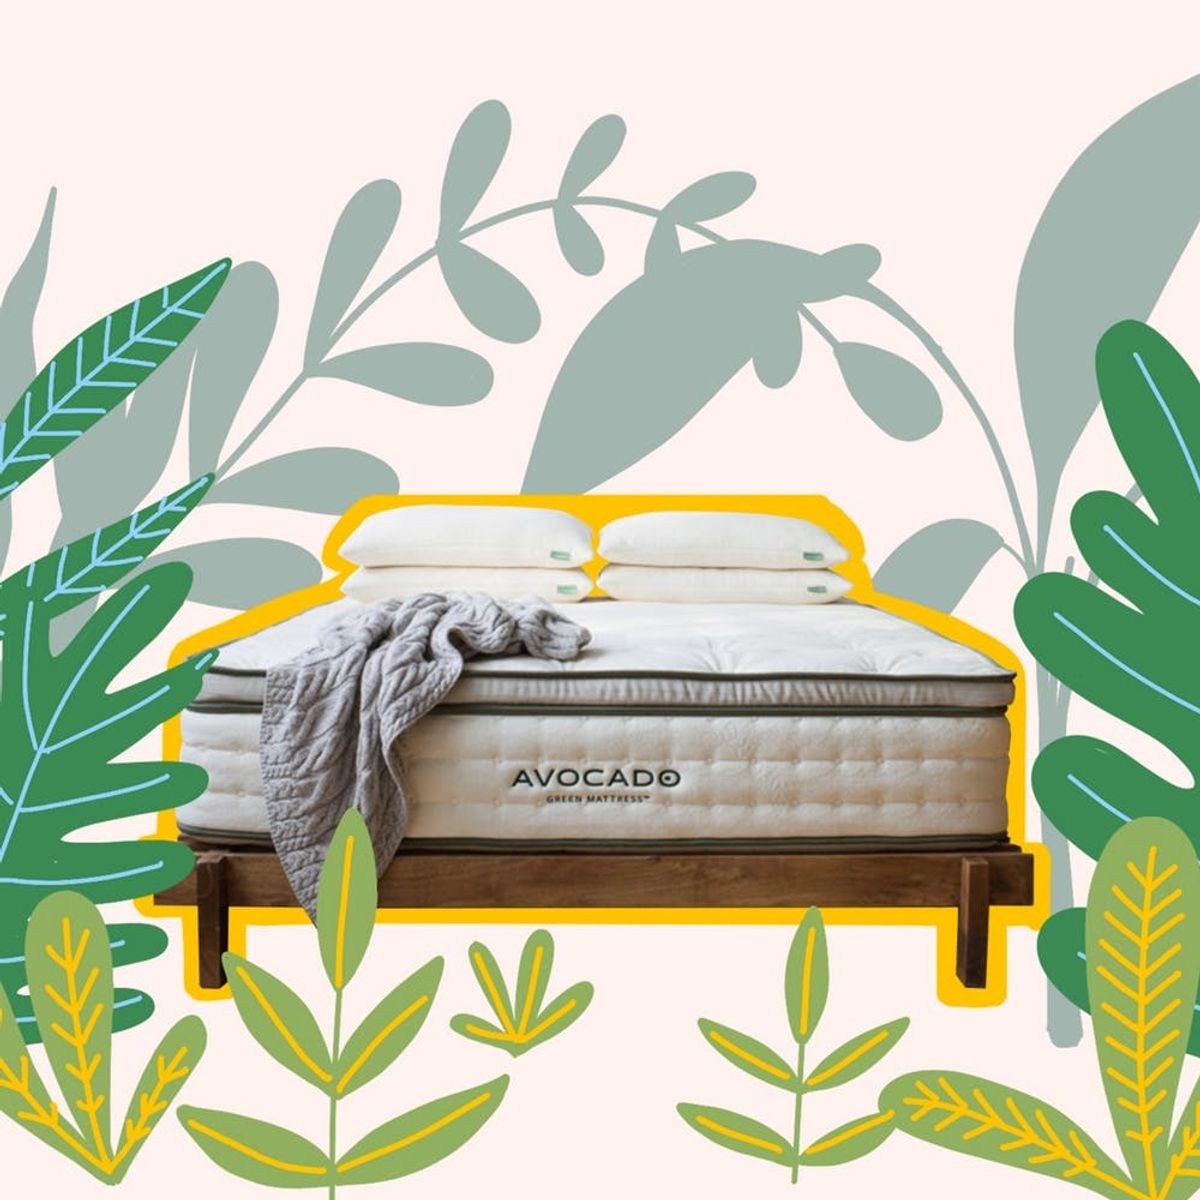 How to Find the Mattress-in-a-Box of Your Dreams